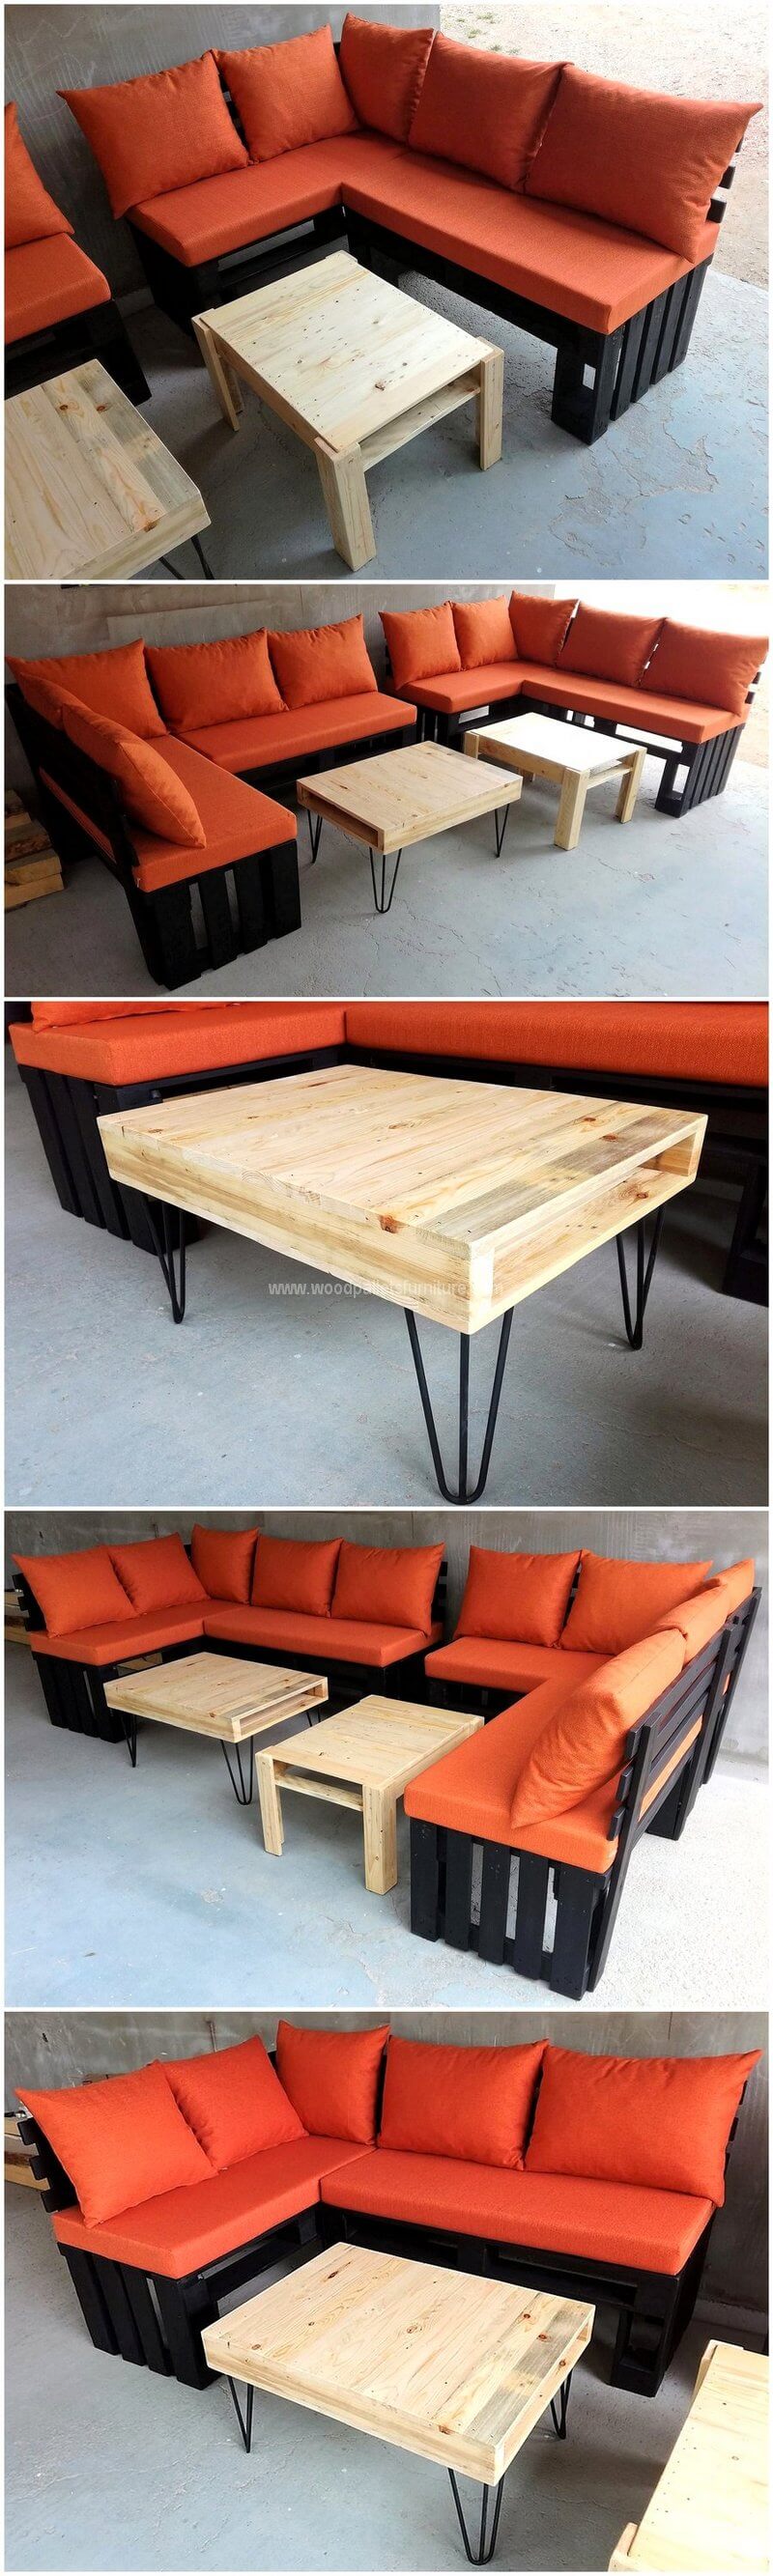 wooden pallet couch with table